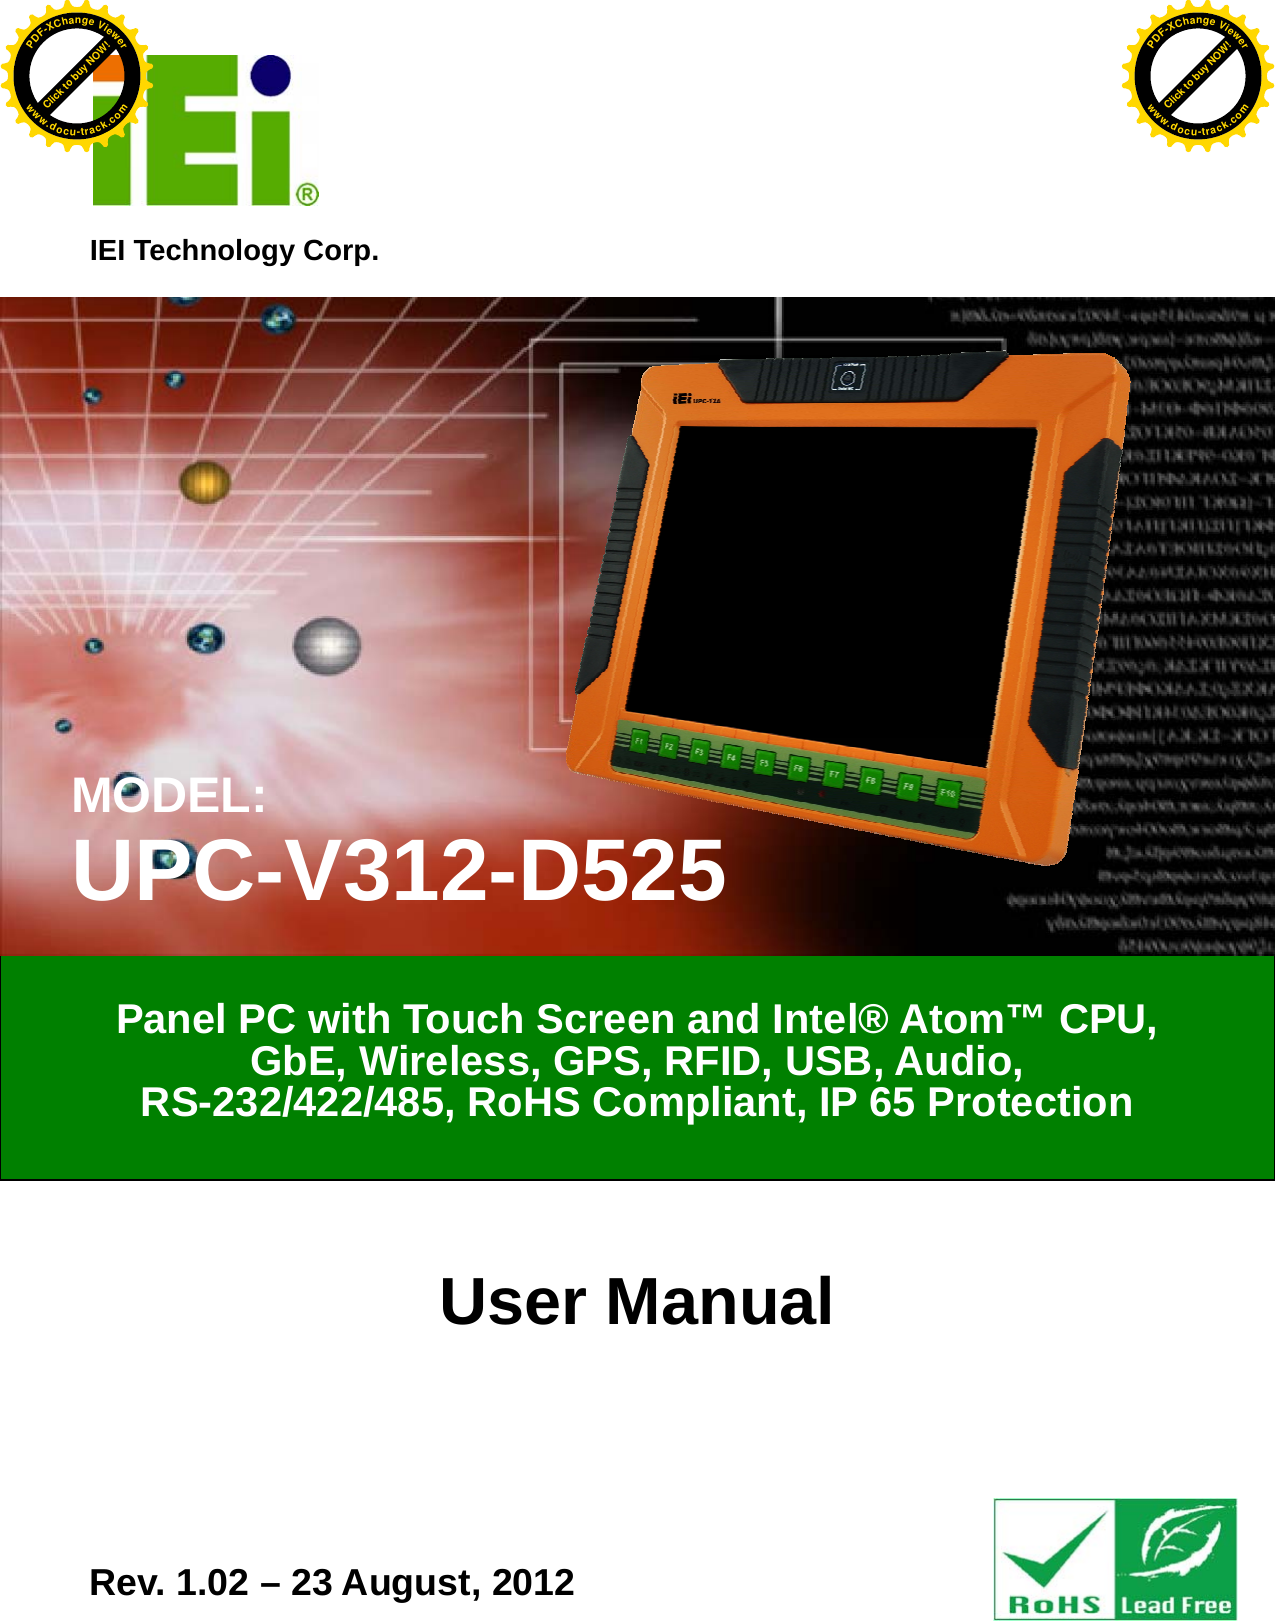   UPC-V312-D525 Panel PC Page i IEI Technology Corp. User Manual UPC-V312-D525 Panel PC MODEL: UPC-V312-D525 Panel PC with Touch Screen and Intel®Atom™ CPU, GbE, Wireless, GPS, RFID, USB, Audio,   RS-232/422/485, RoHS Compliant, IP 65 Protection Rev. 1.02 – 23 August, 2012 Click to buy NOW!PDF-XChange Viewerwww.docu-track.comClick to buy NOW!PDF-XChange Viewerwww.docu-track.com